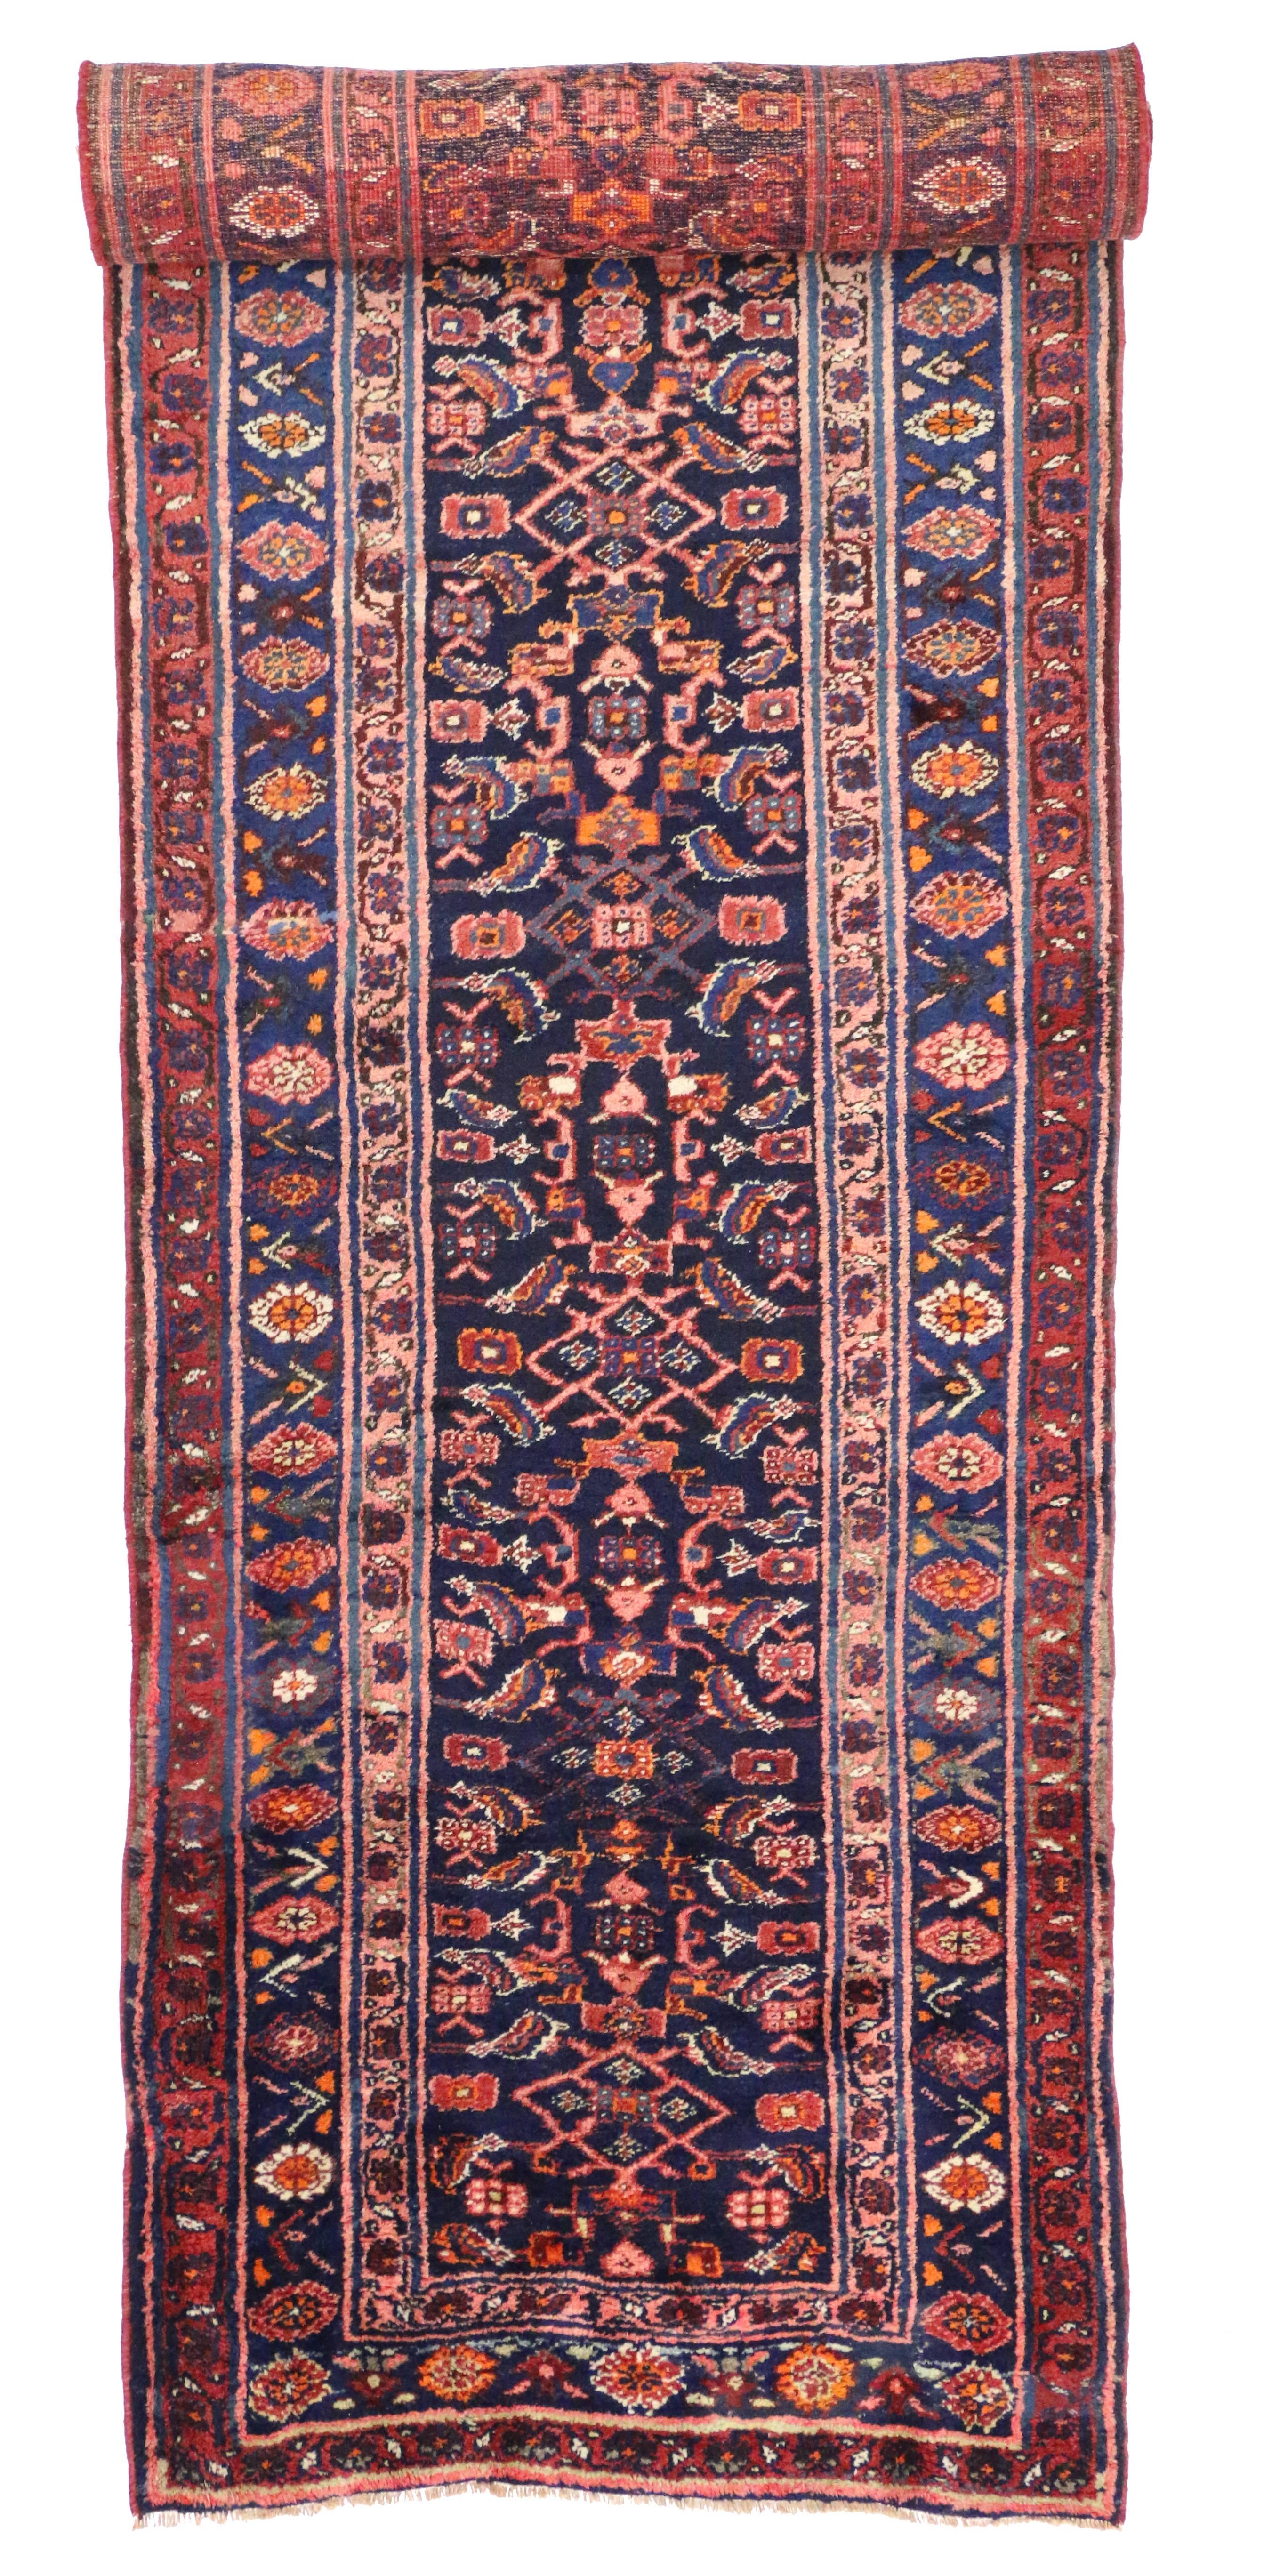 Late 19th-Century Antique Persian Kurd Runner with Modern Victorian Style 2